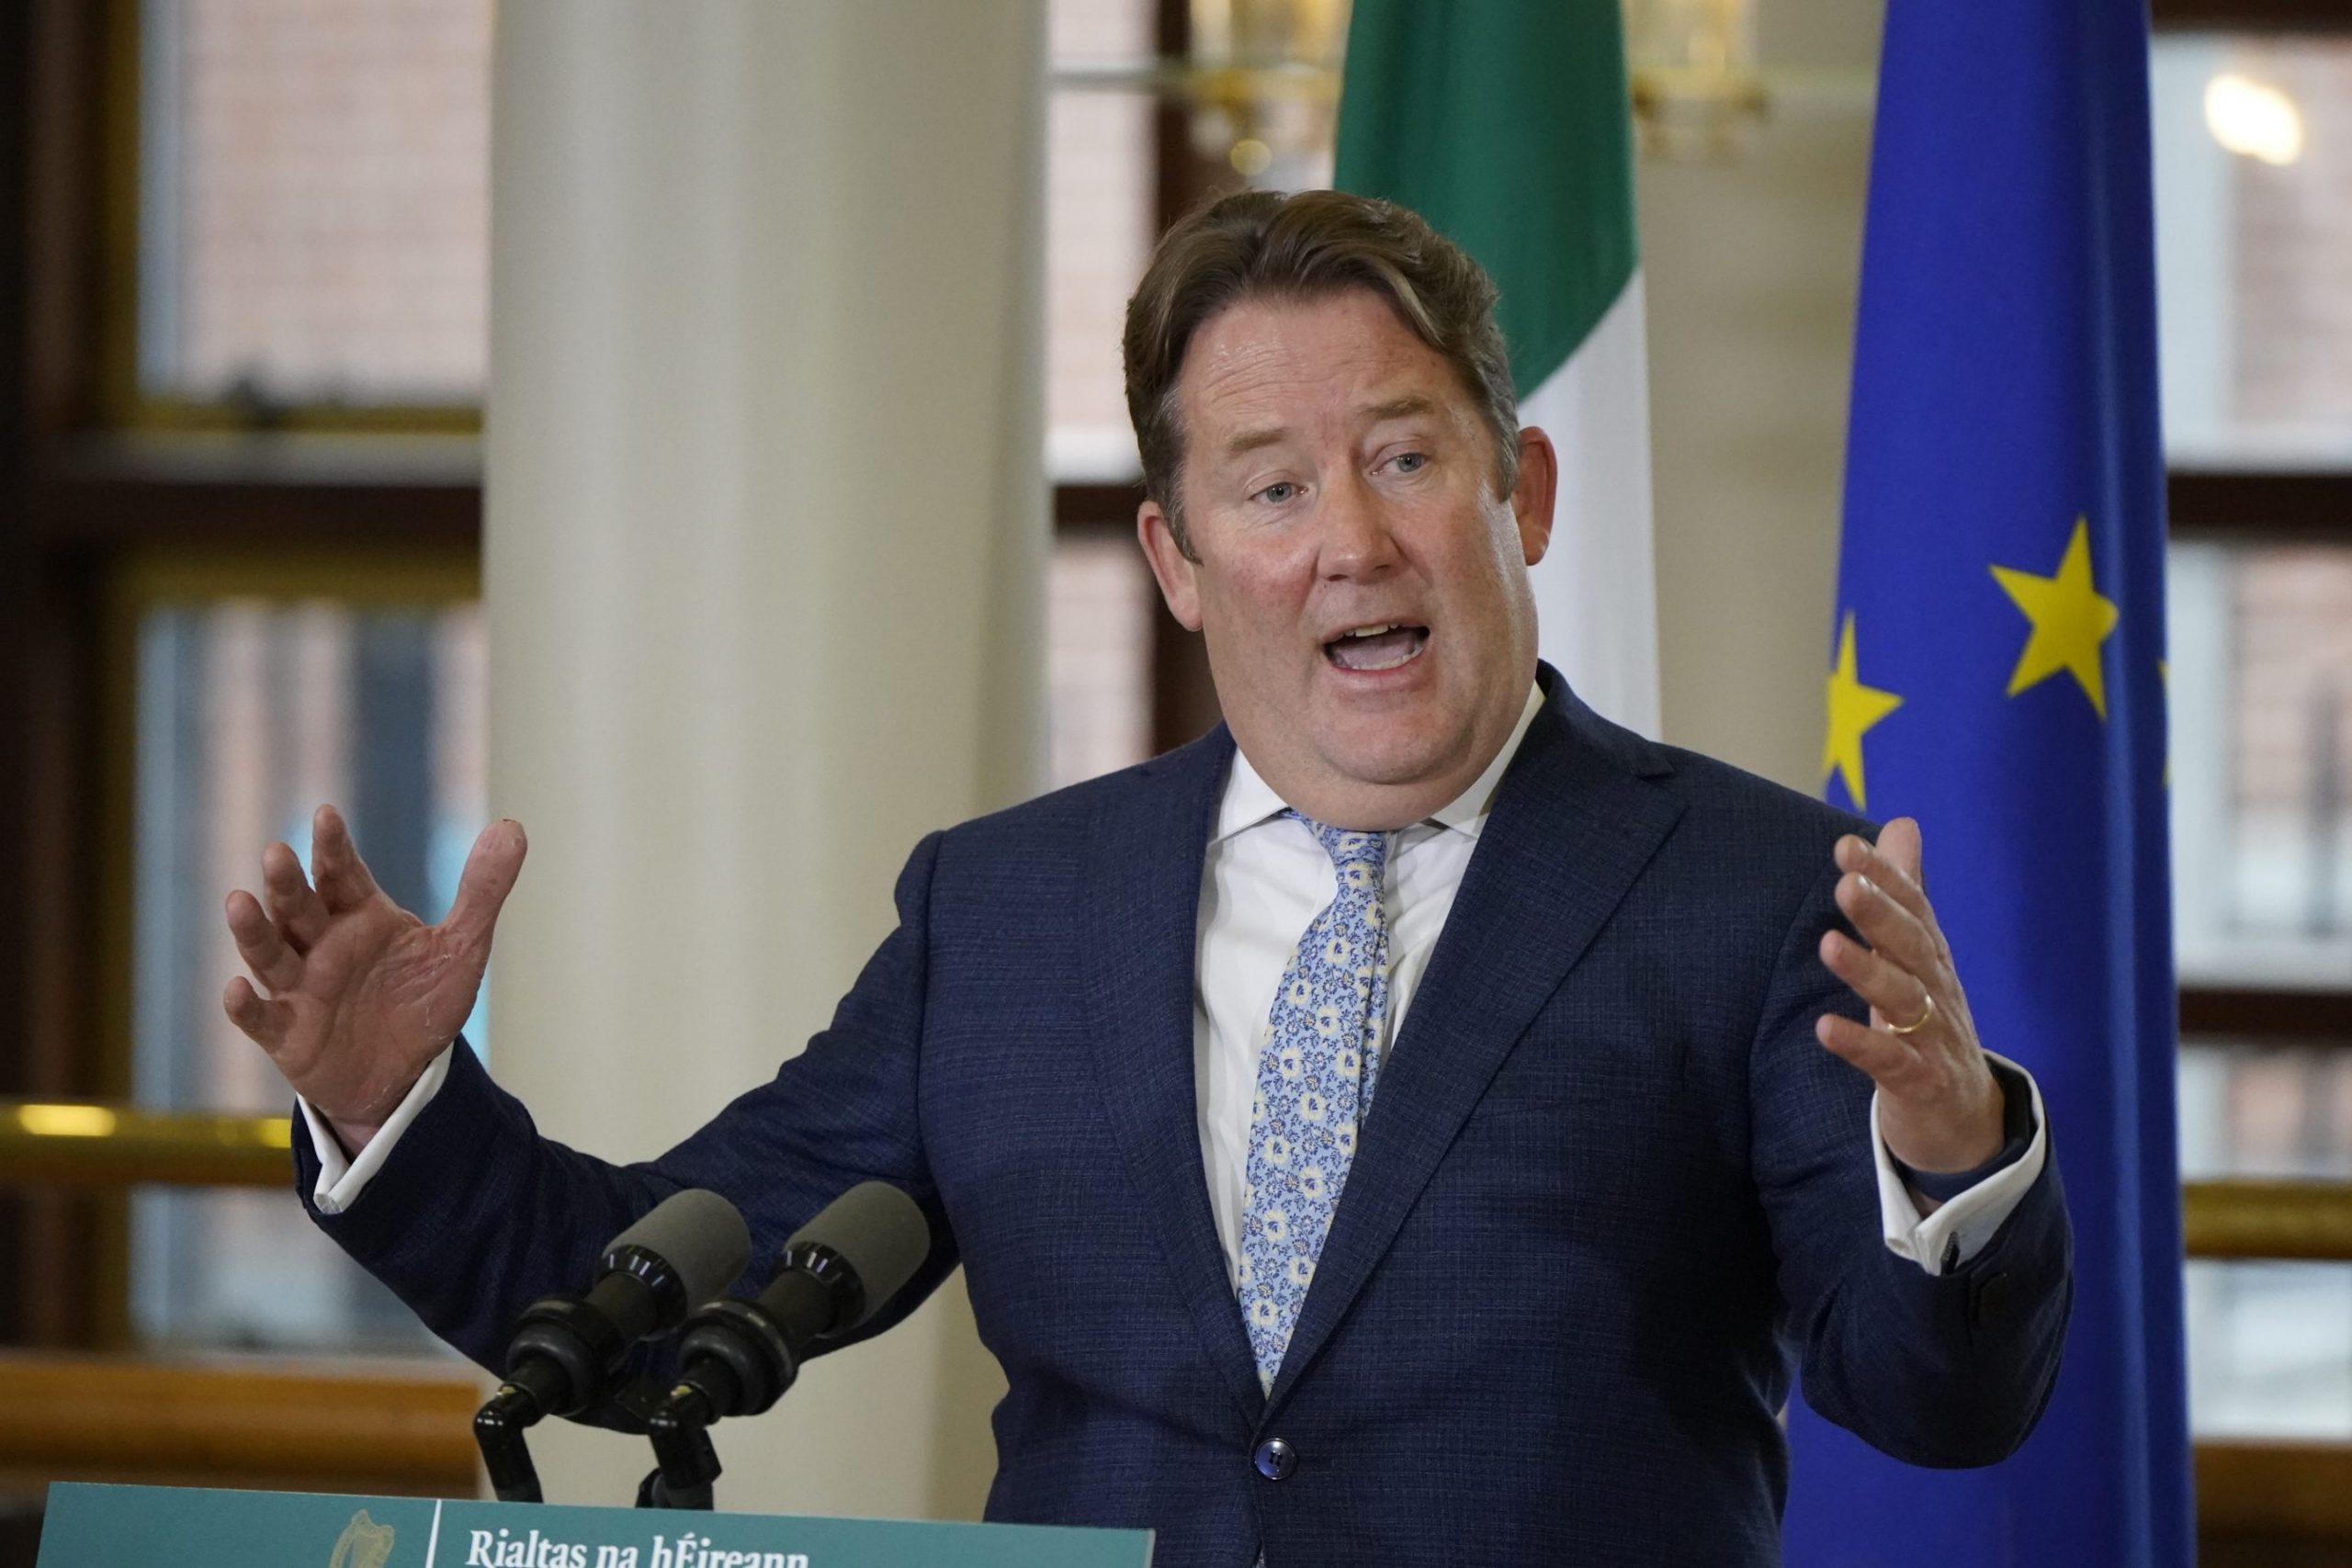 Ireland wants to ban crypto contributions to political parties because of Russian election meddling while Ukraine rakes in millions in alternative currencies